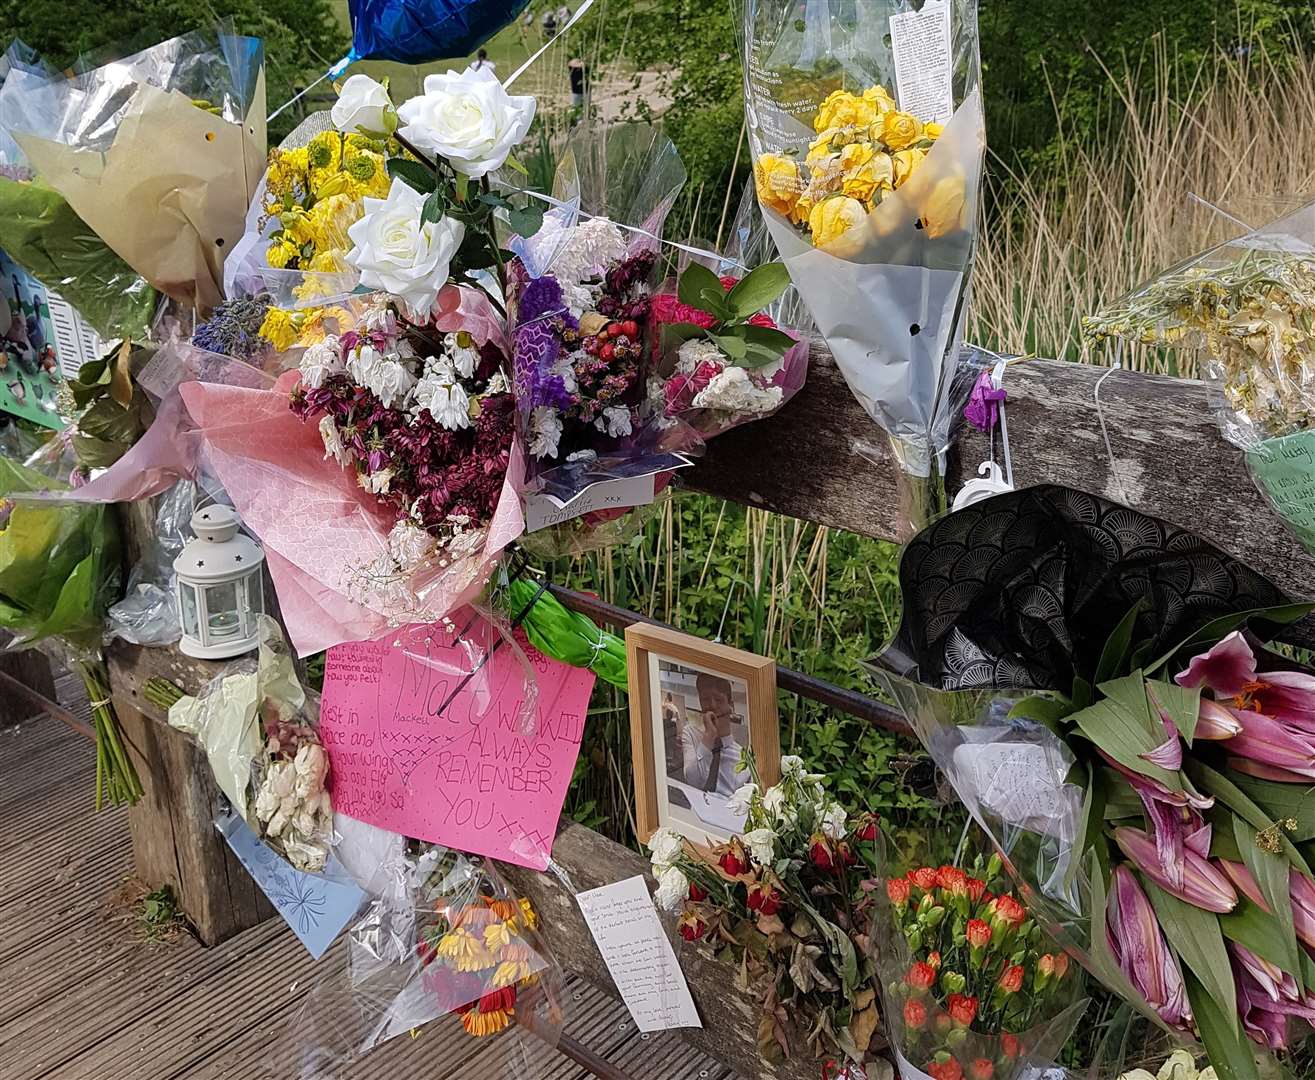 Flowers and messages were left at Dunorlan Park in memory of Matthew Mackell